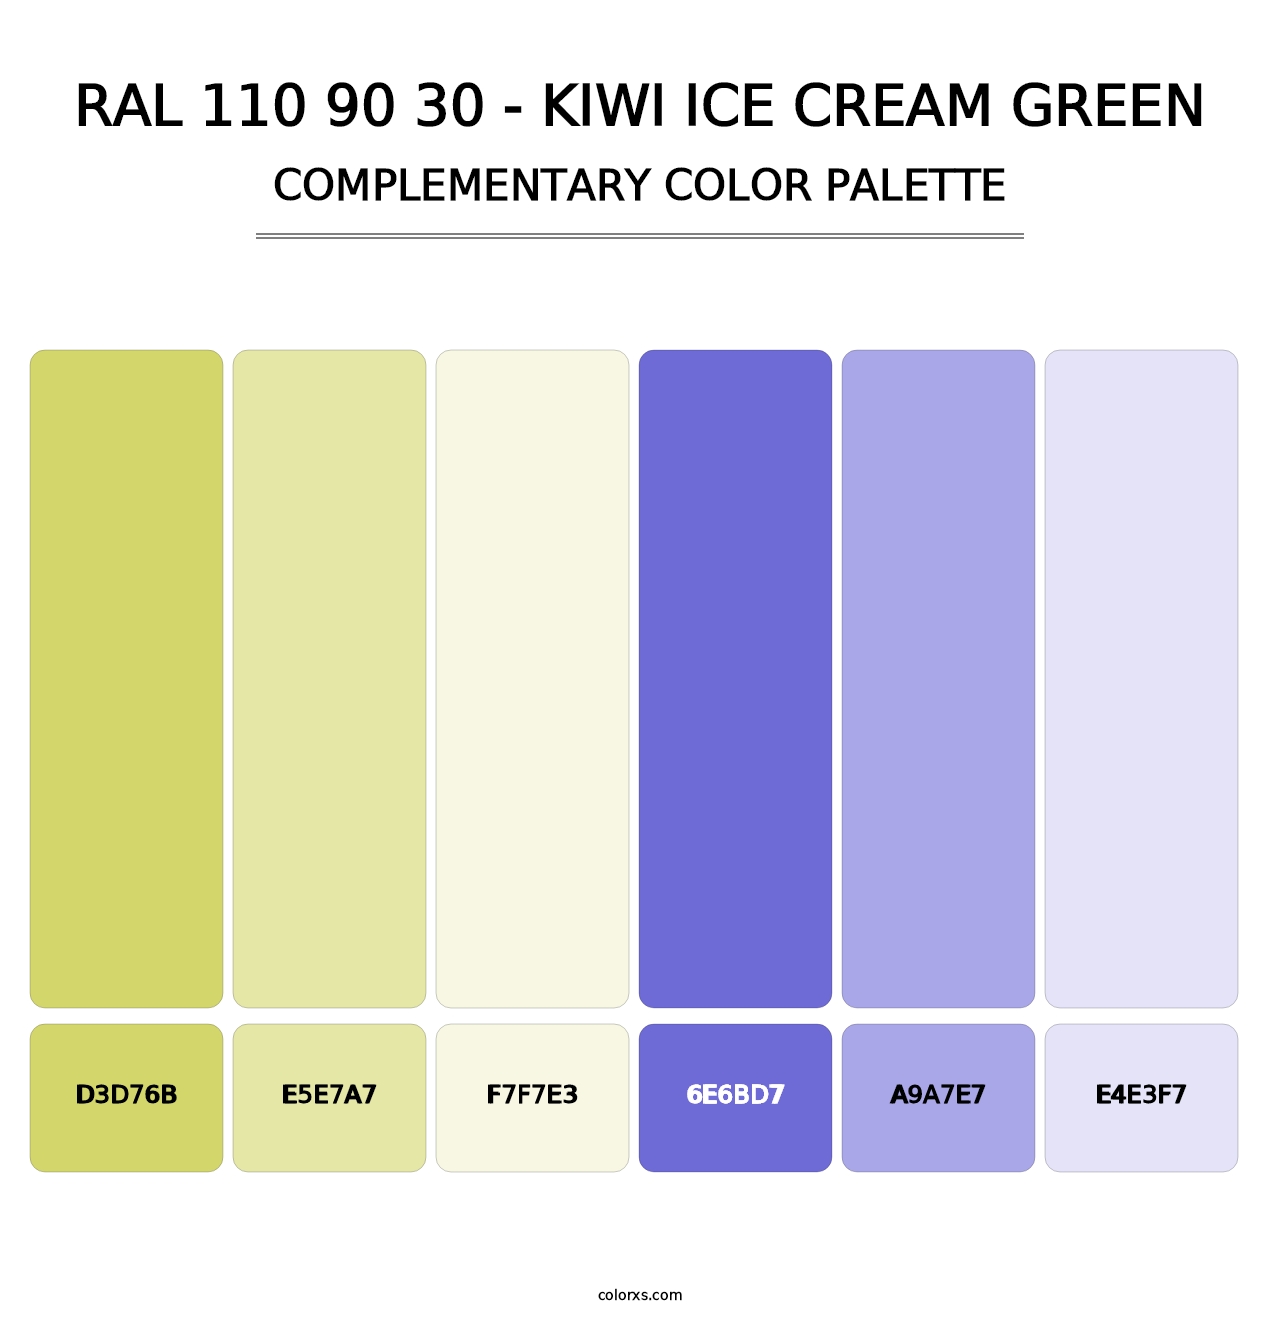 RAL 110 90 30 - Kiwi Ice Cream Green - Complementary Color Palette